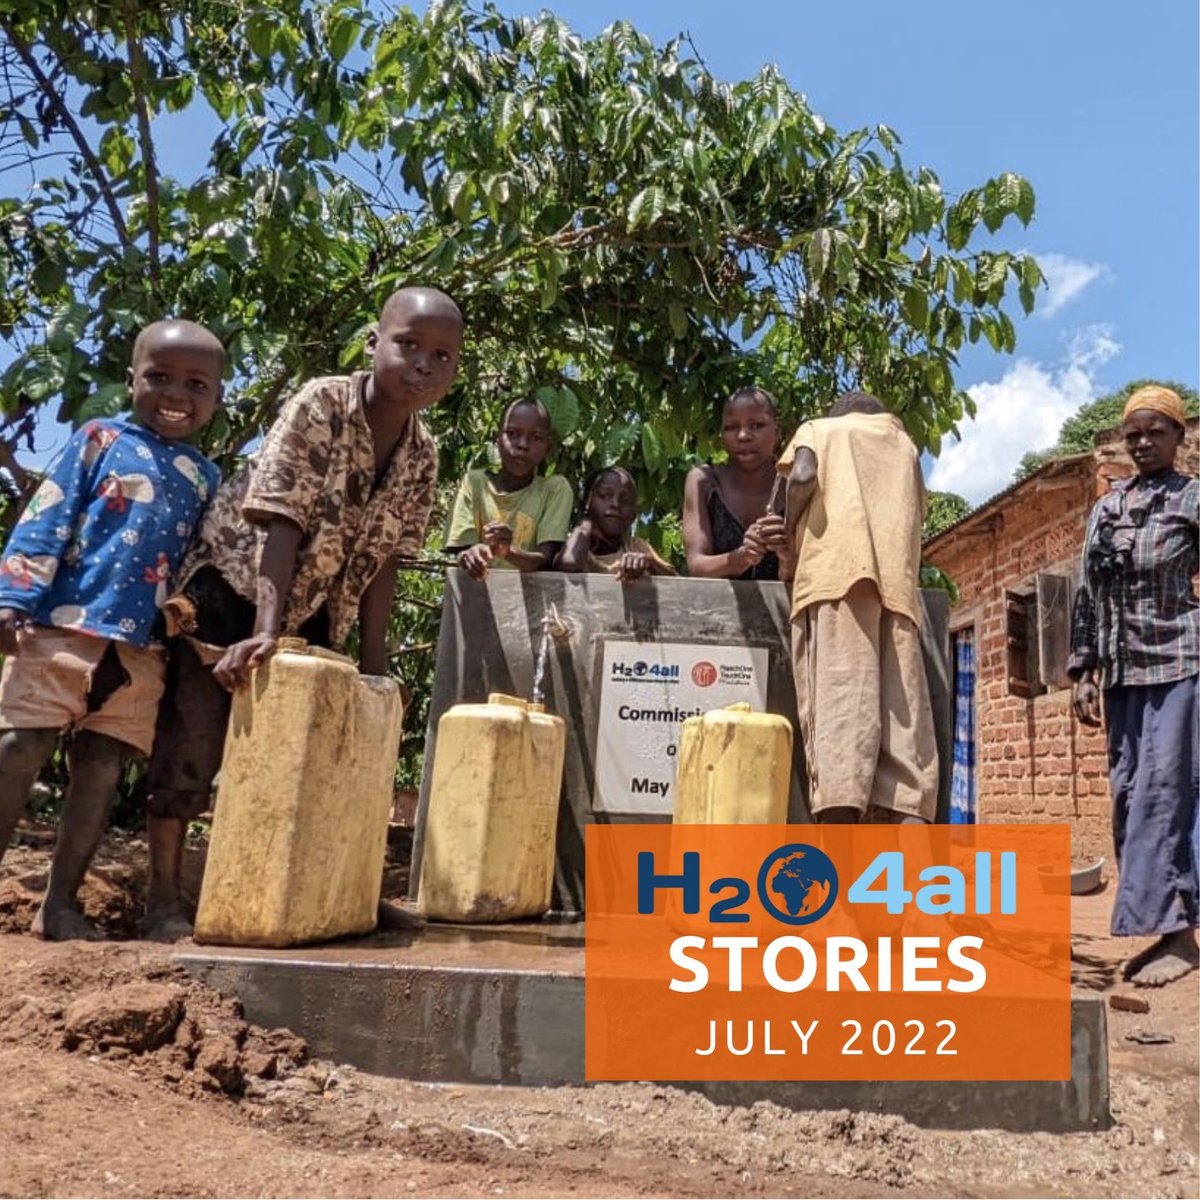 #H2o4ALLStories | Check out our July Newsletter here: eepurl.com/h7hL-1.

#safewater #safewaterforall #water #newsletter